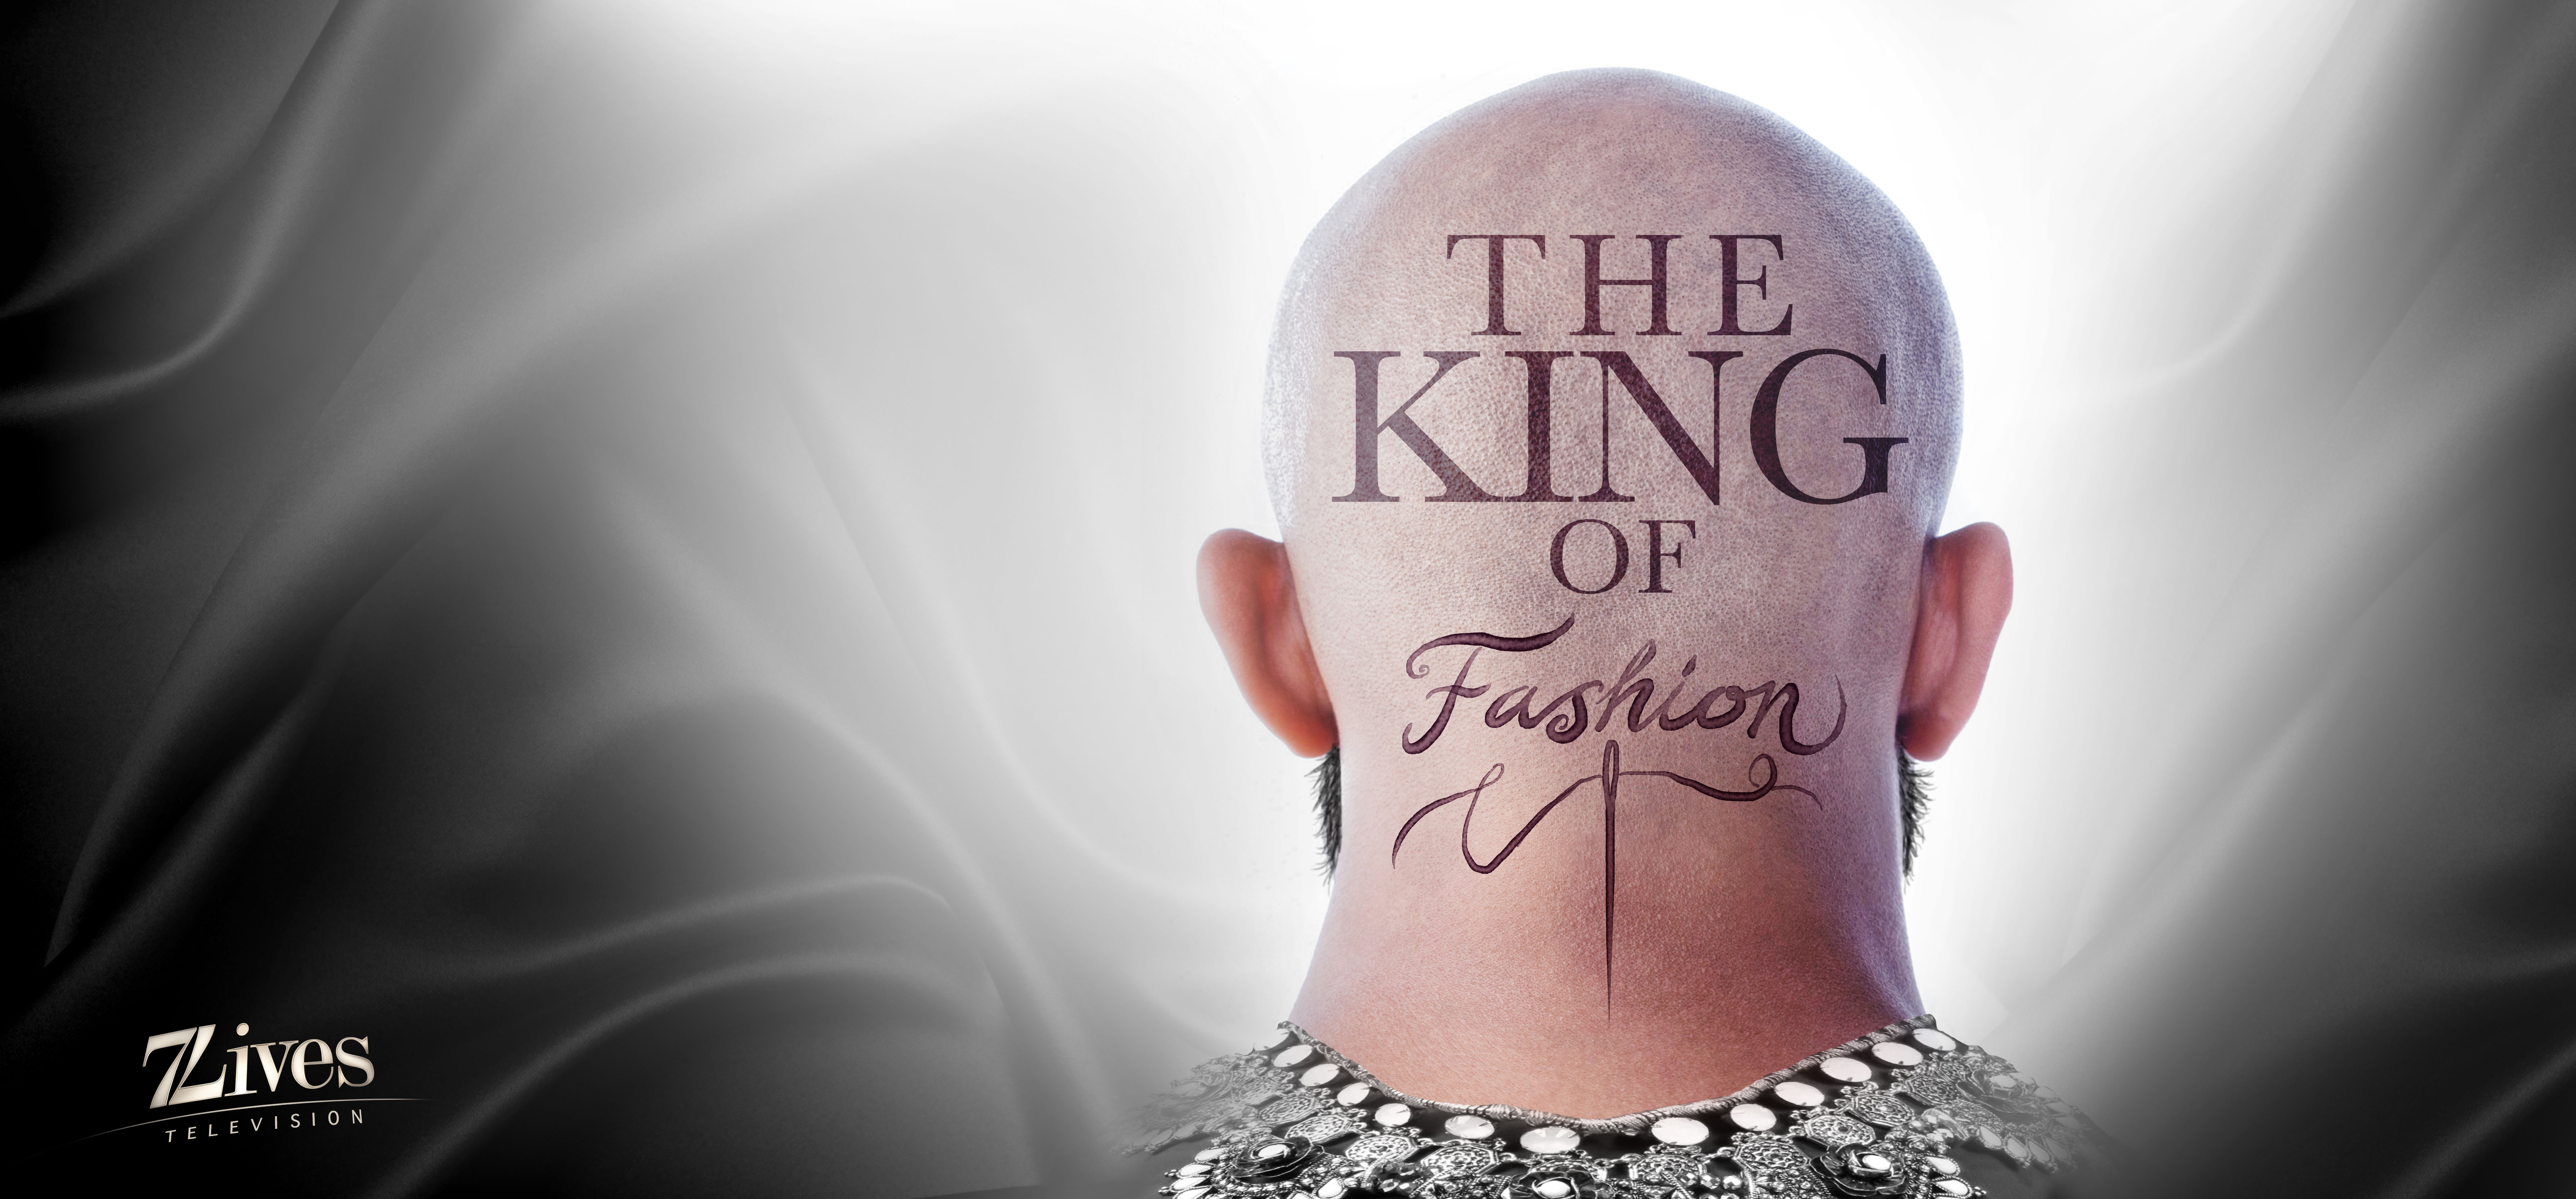 The King of Fashion / The King of Fashion (2018)